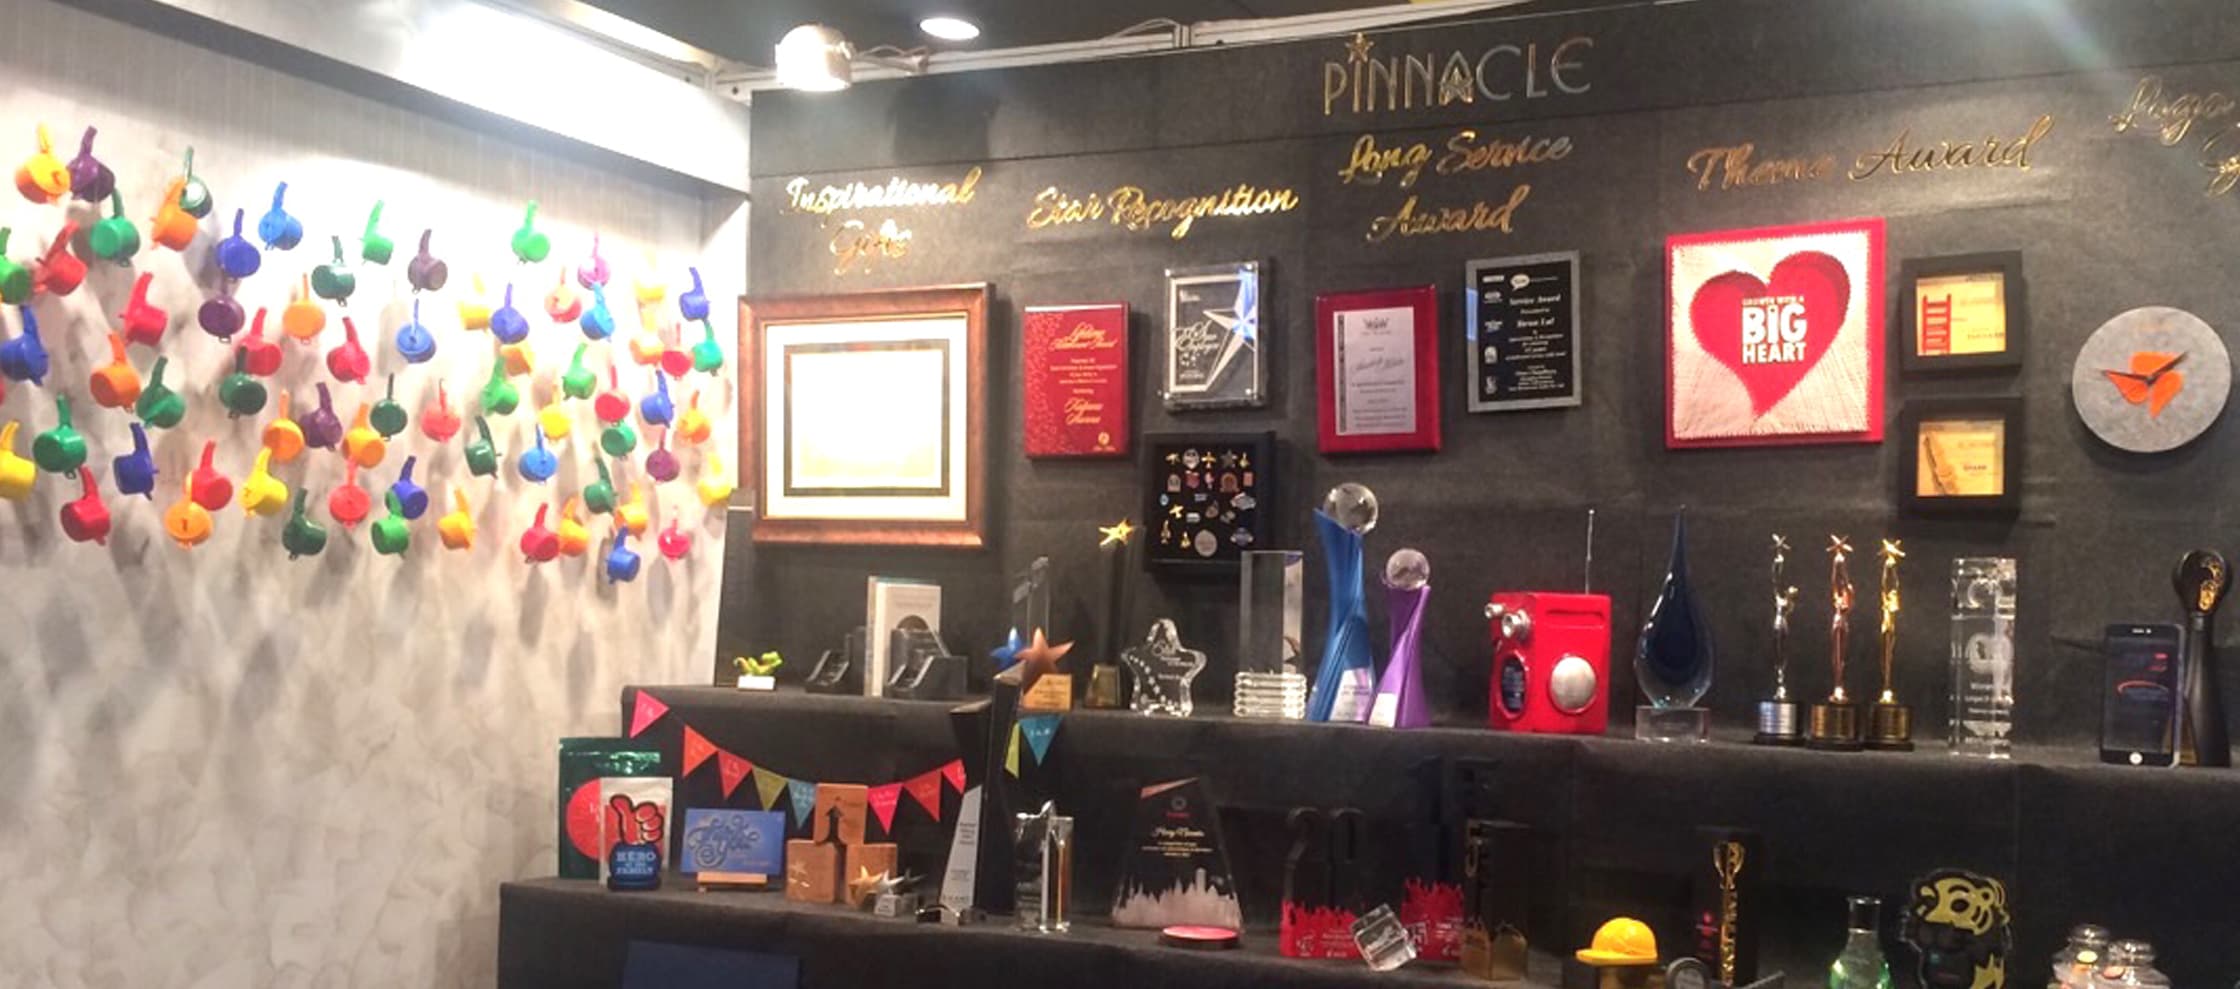 Products of Pinnacle Works displayed at an Exhibition booth beautifully